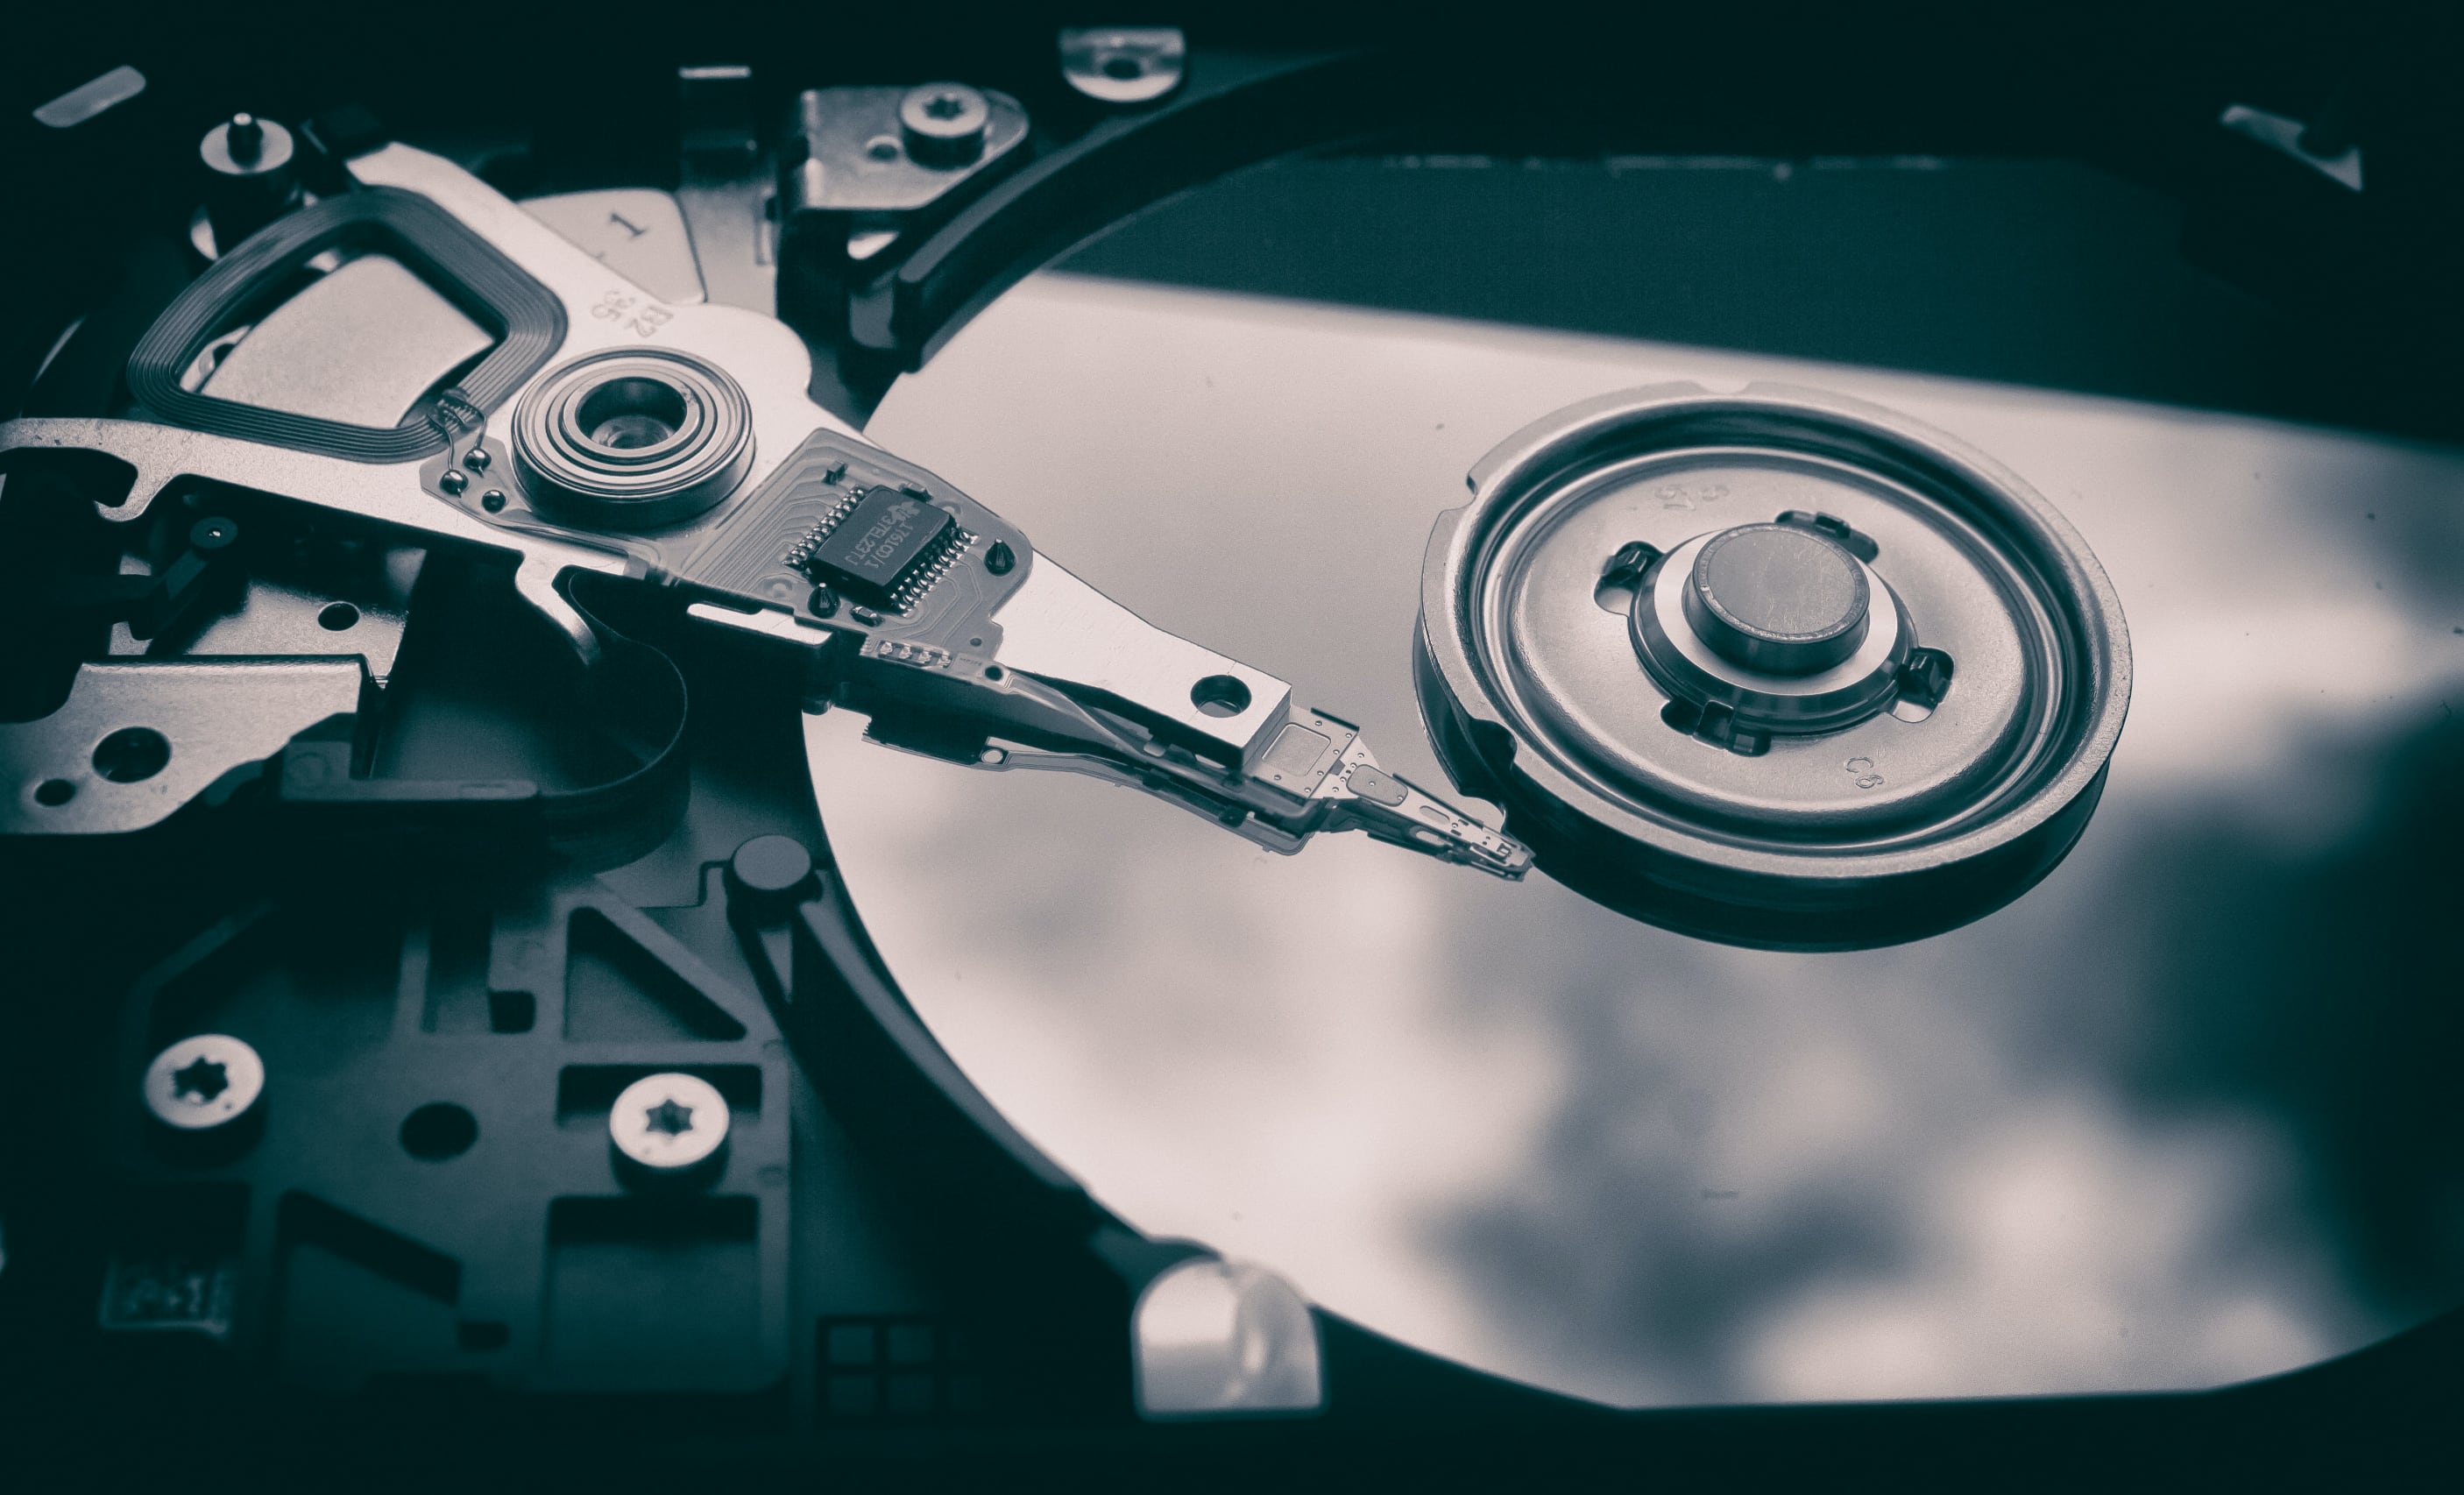 Study finds that when HDDs fail, it's typically within 3 years of operation